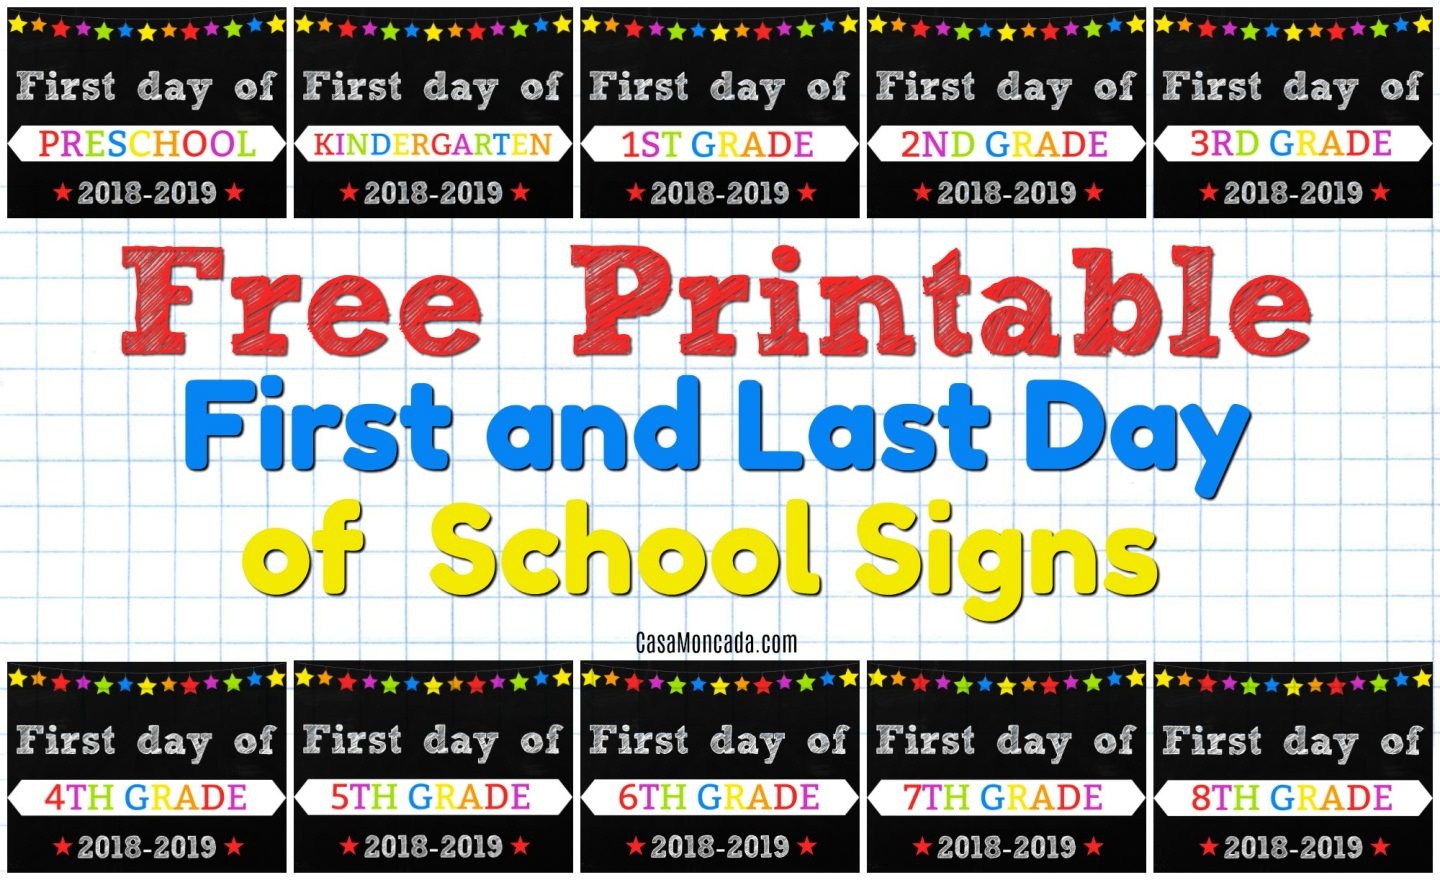 Free Printable First And Last Day Of School Signs - Casa Moncada - First Day Of School Printable Free